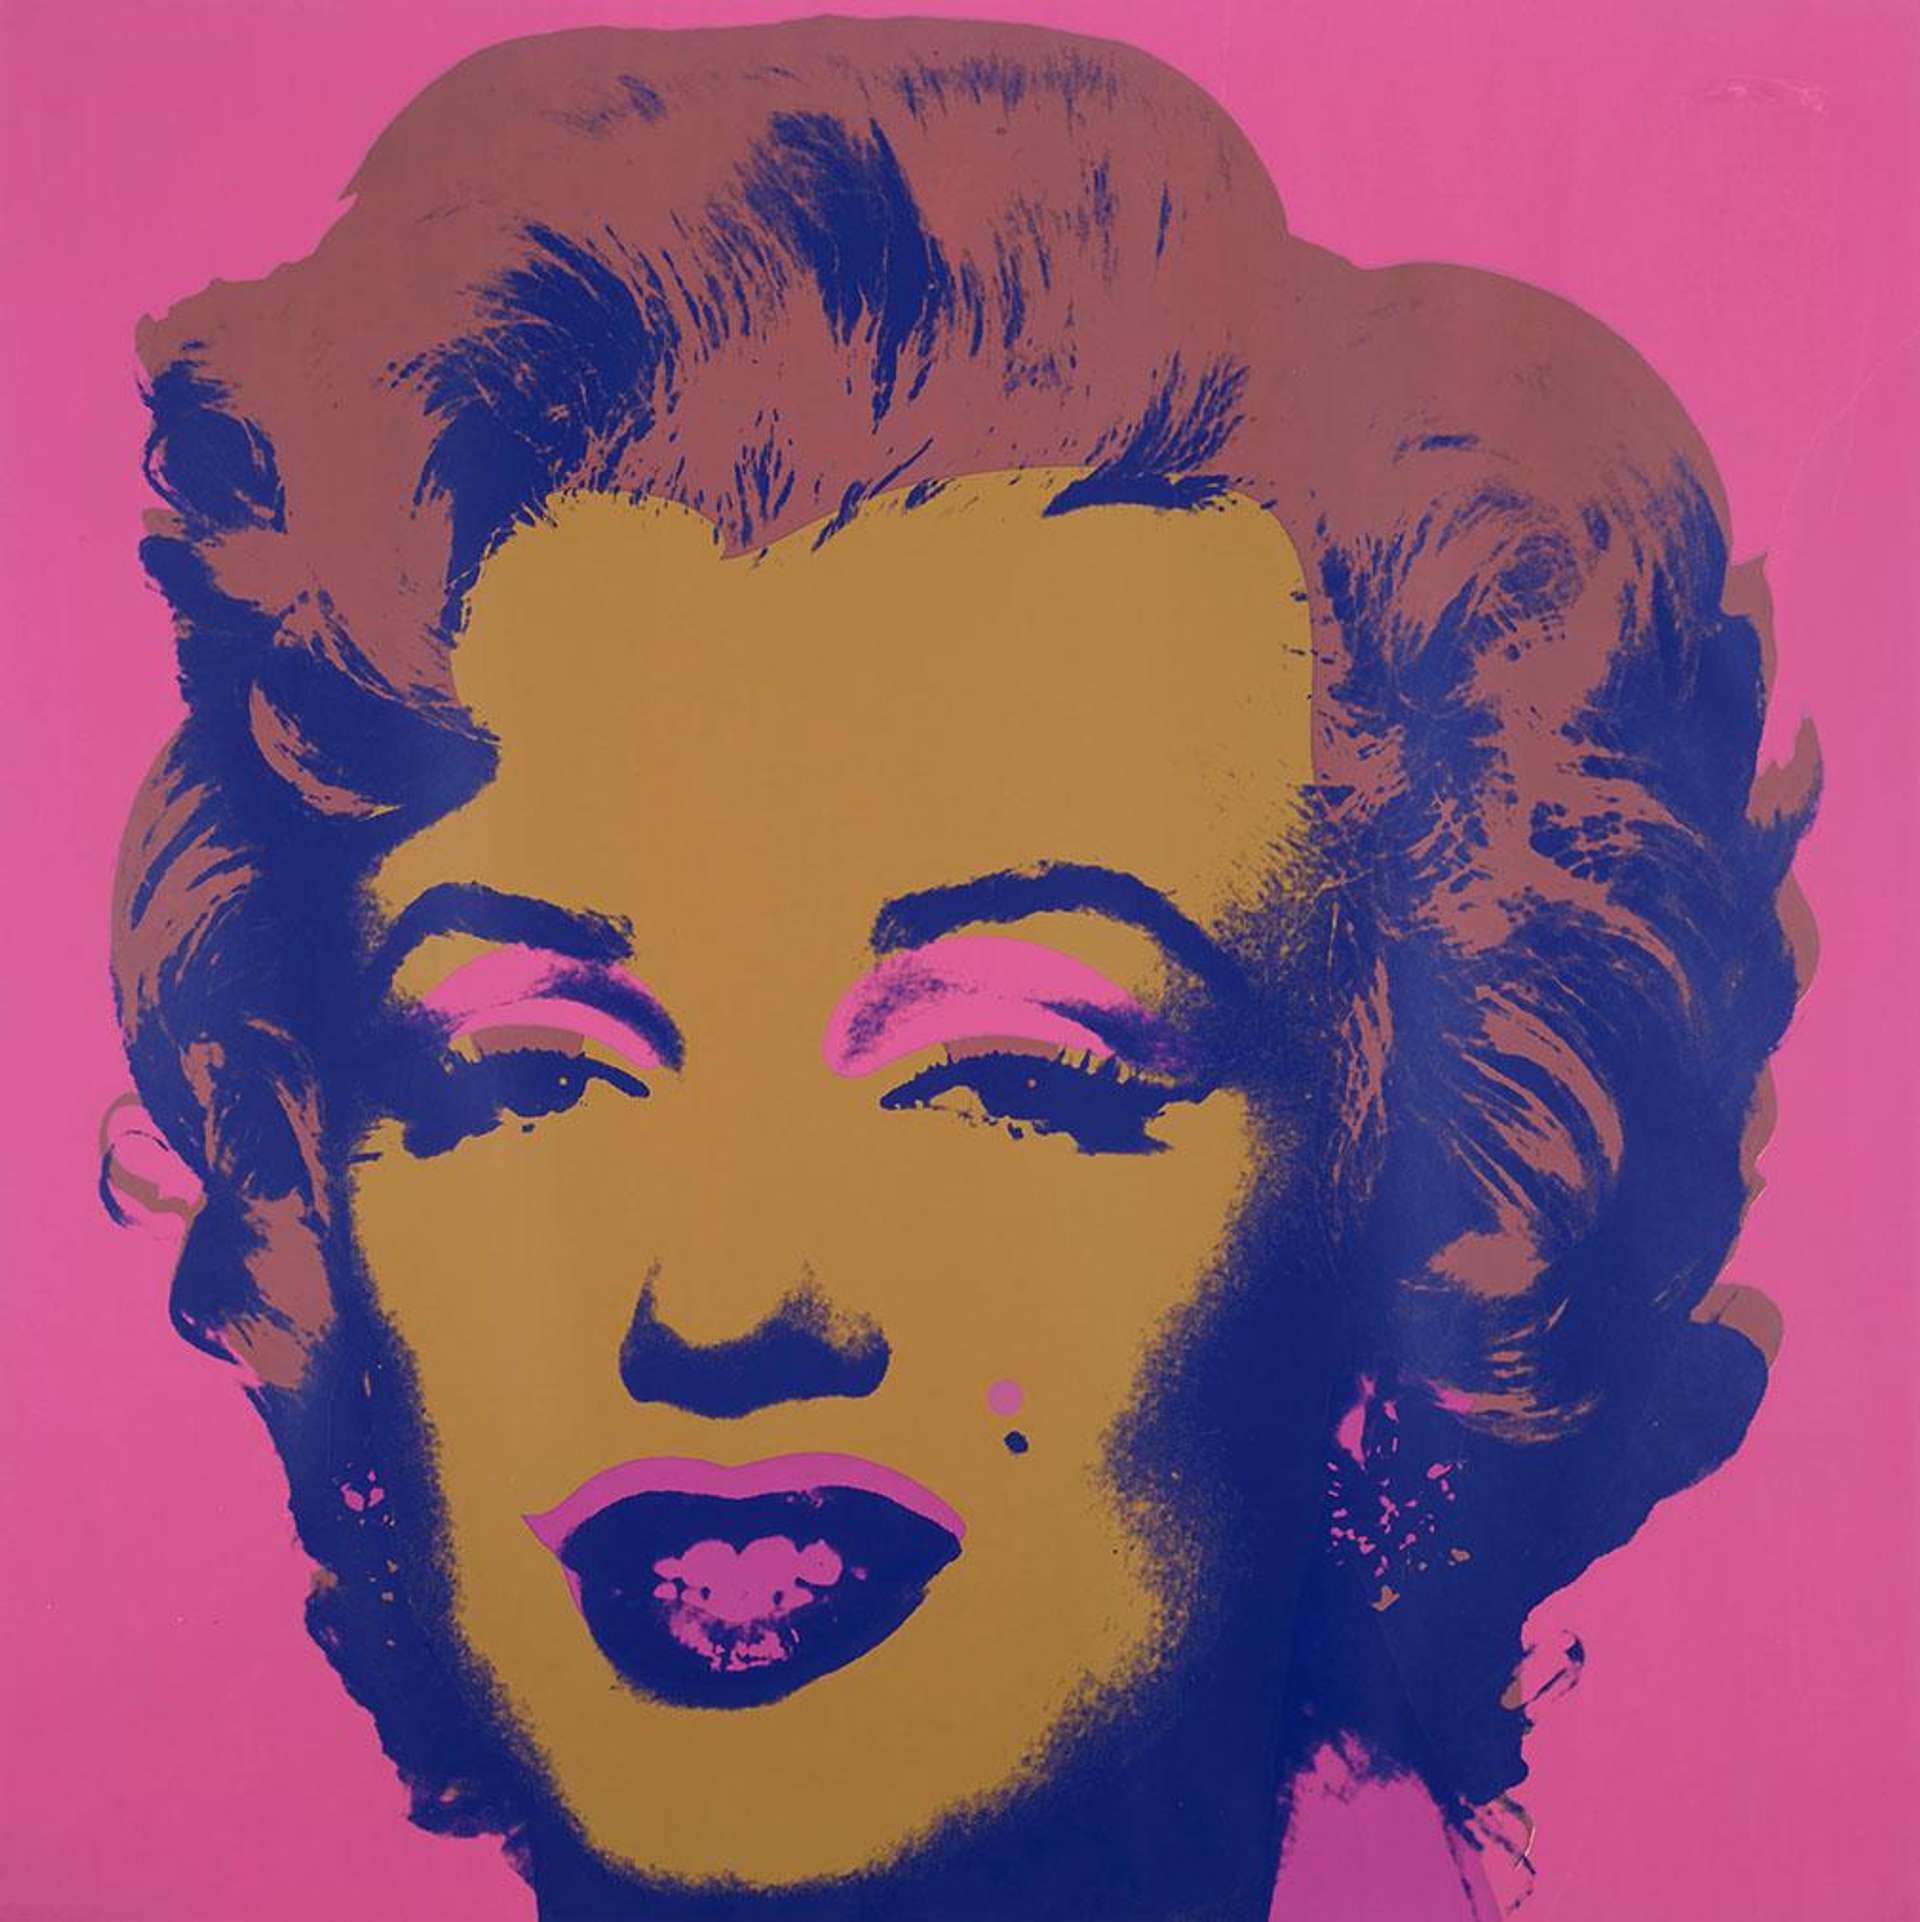 A screen print portrait of Hollywood starlet Marilyn Monroe by Andy Warhol. Monroe's close-up portrait appears at the centre of a bright pink background, her skin executed in yellow ochre, and her hair in orange and blue, with pink accents on the actress' lips and eyelids.